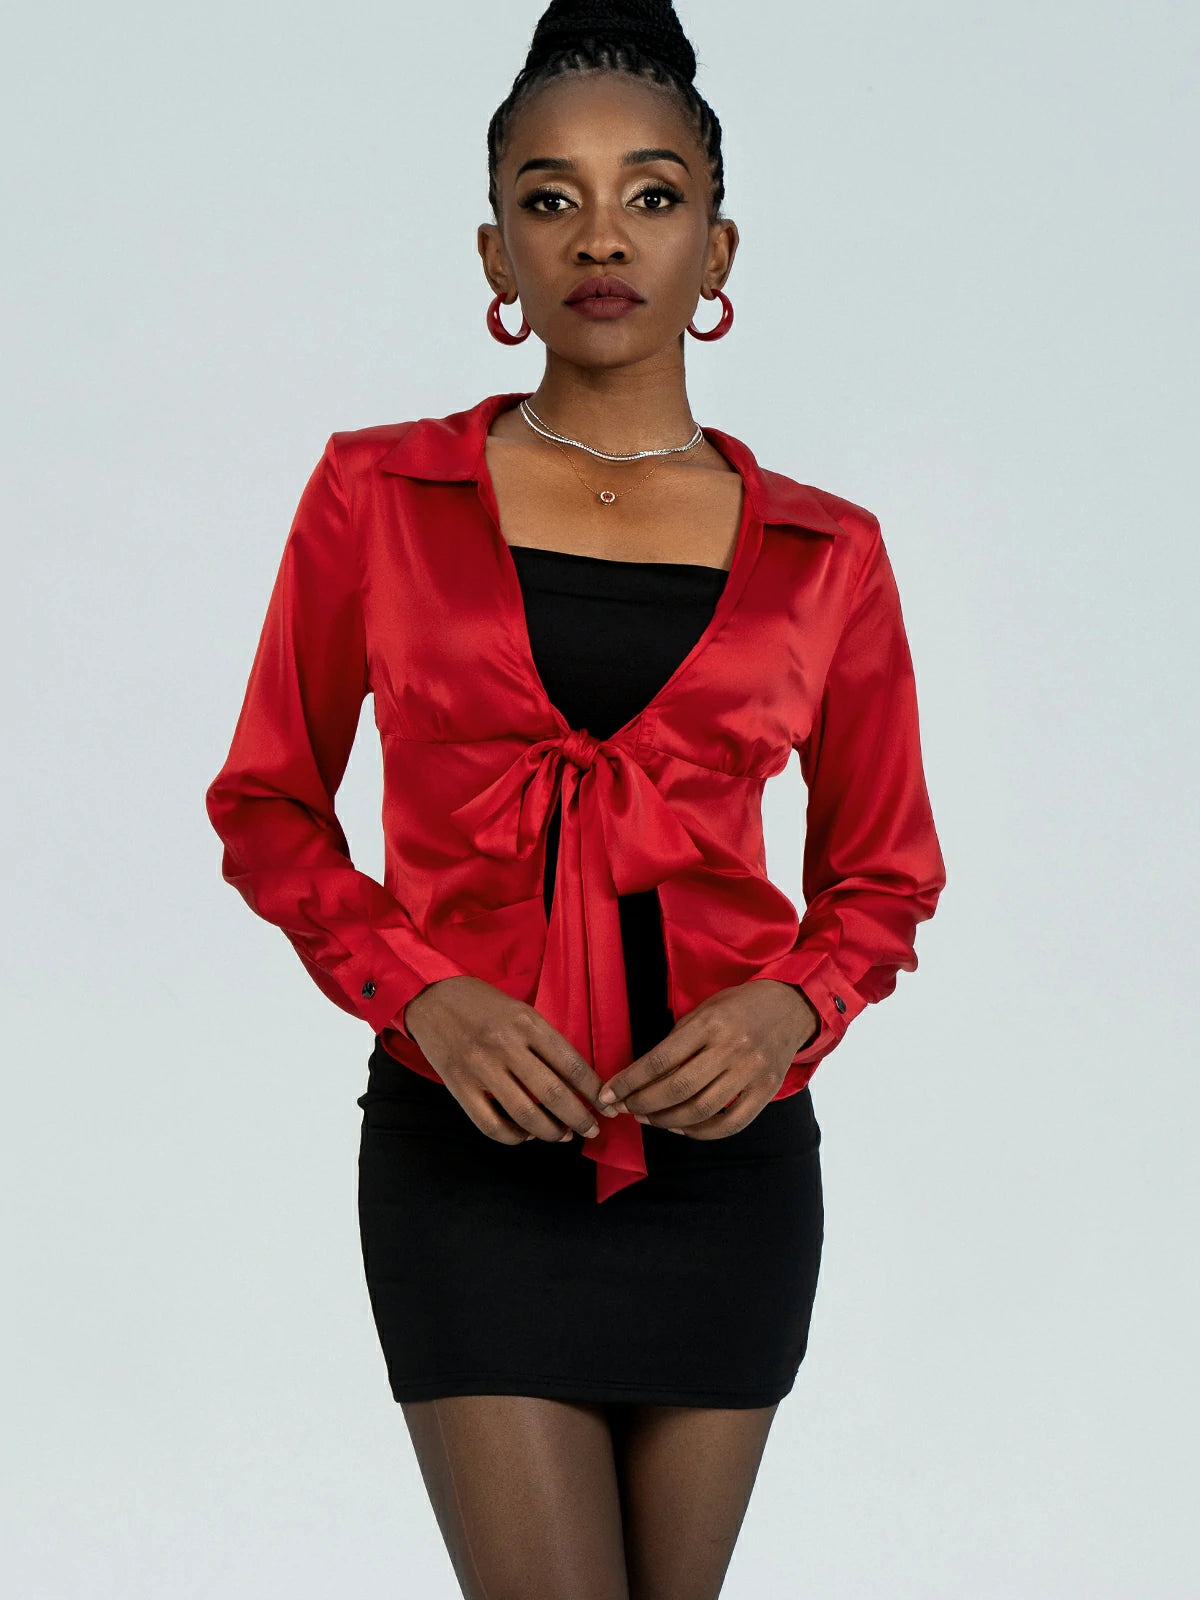 Refined long-sleeved shirt with lapel and deep V-neck features